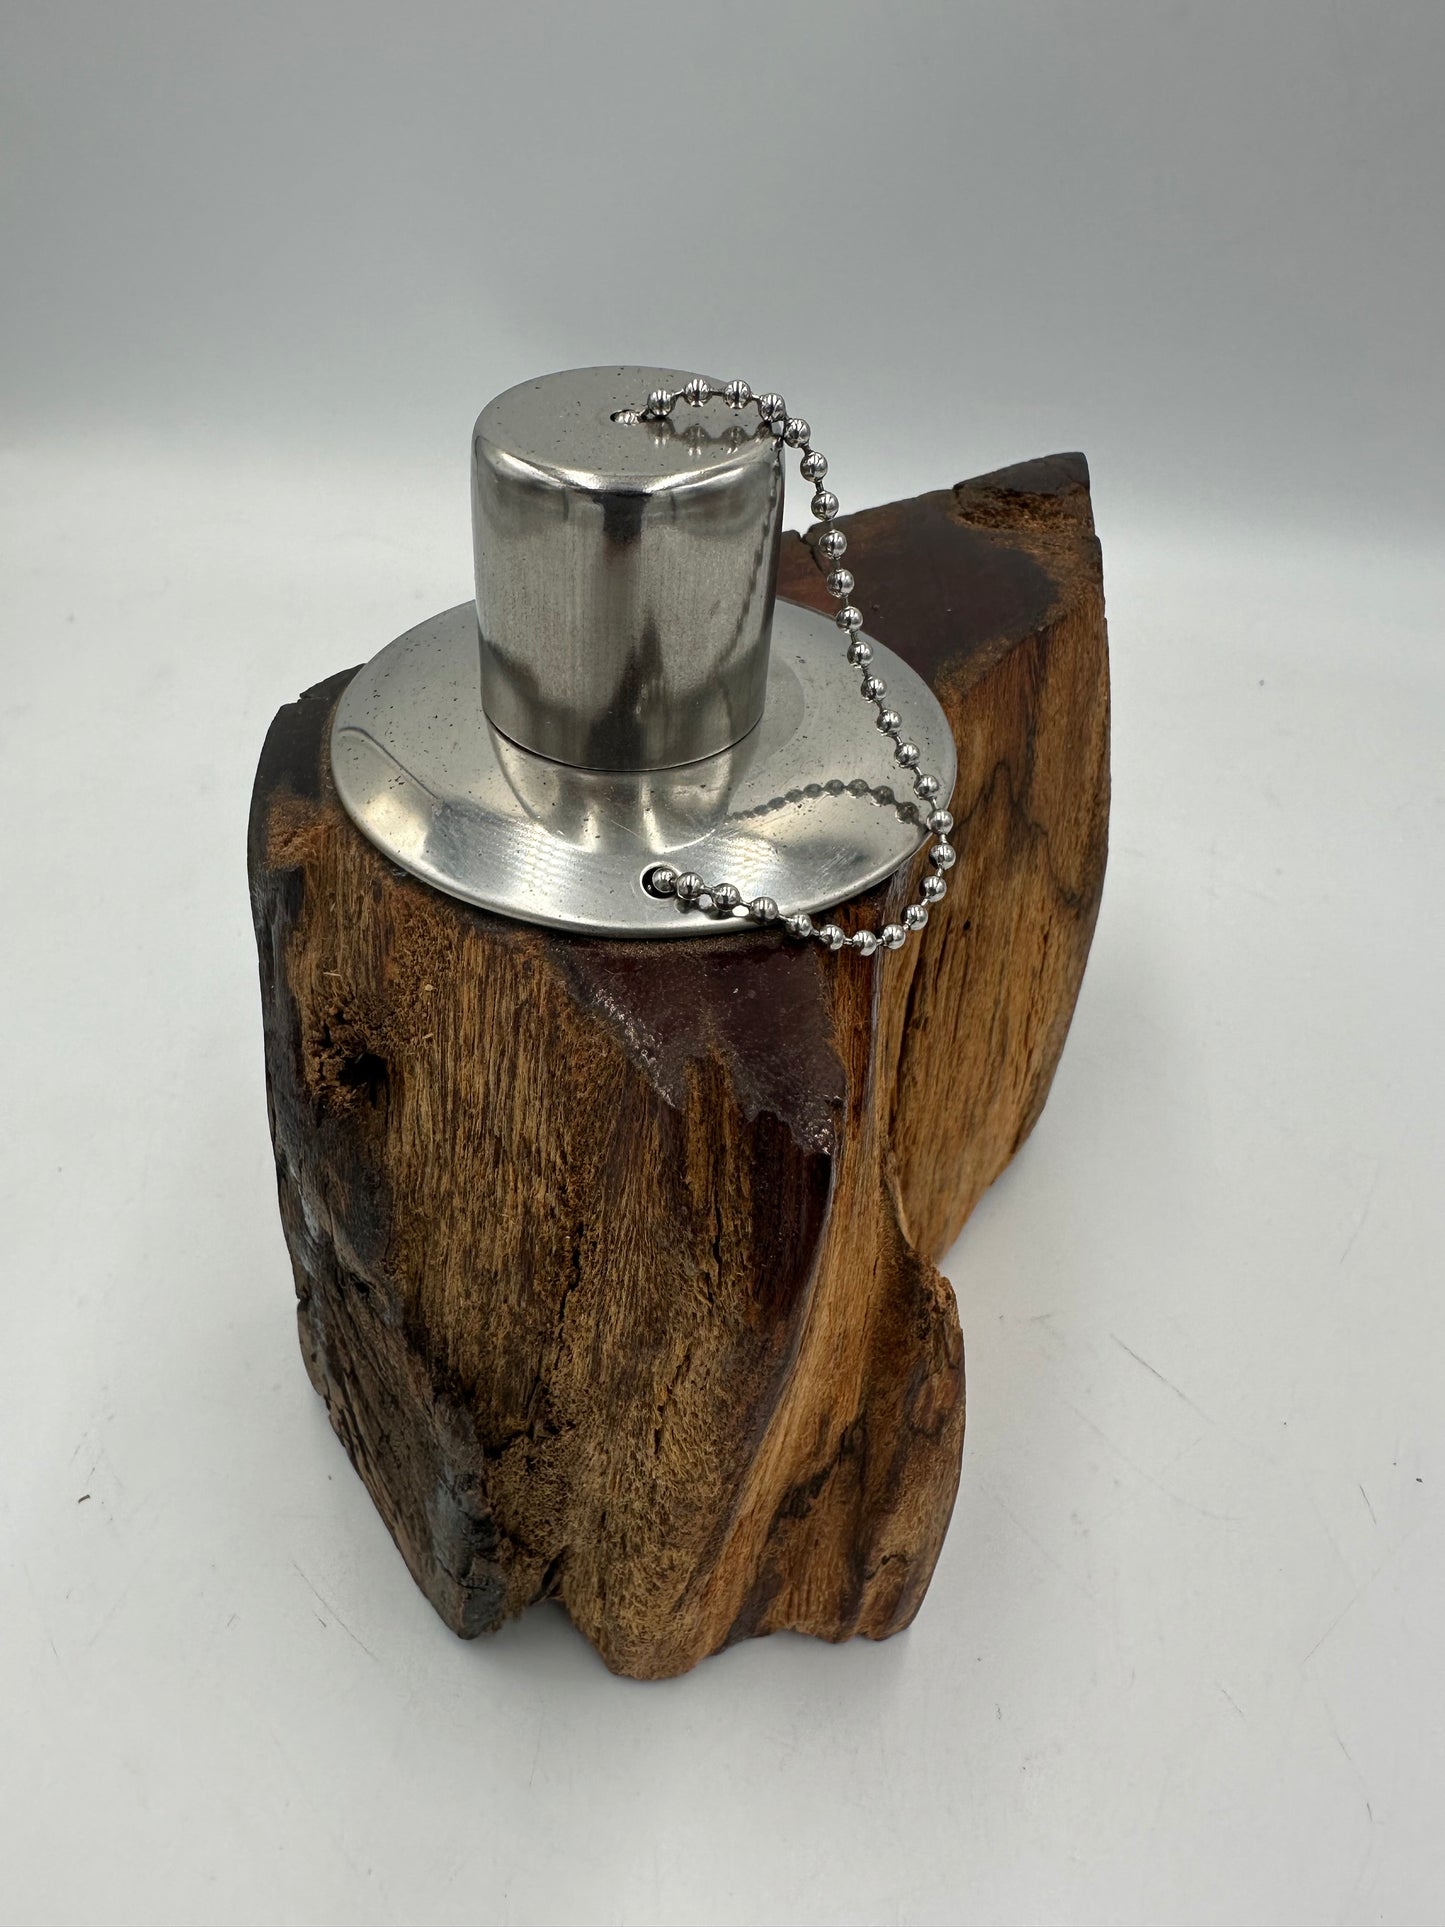 Recycled Wooden Oil Burner Small 48